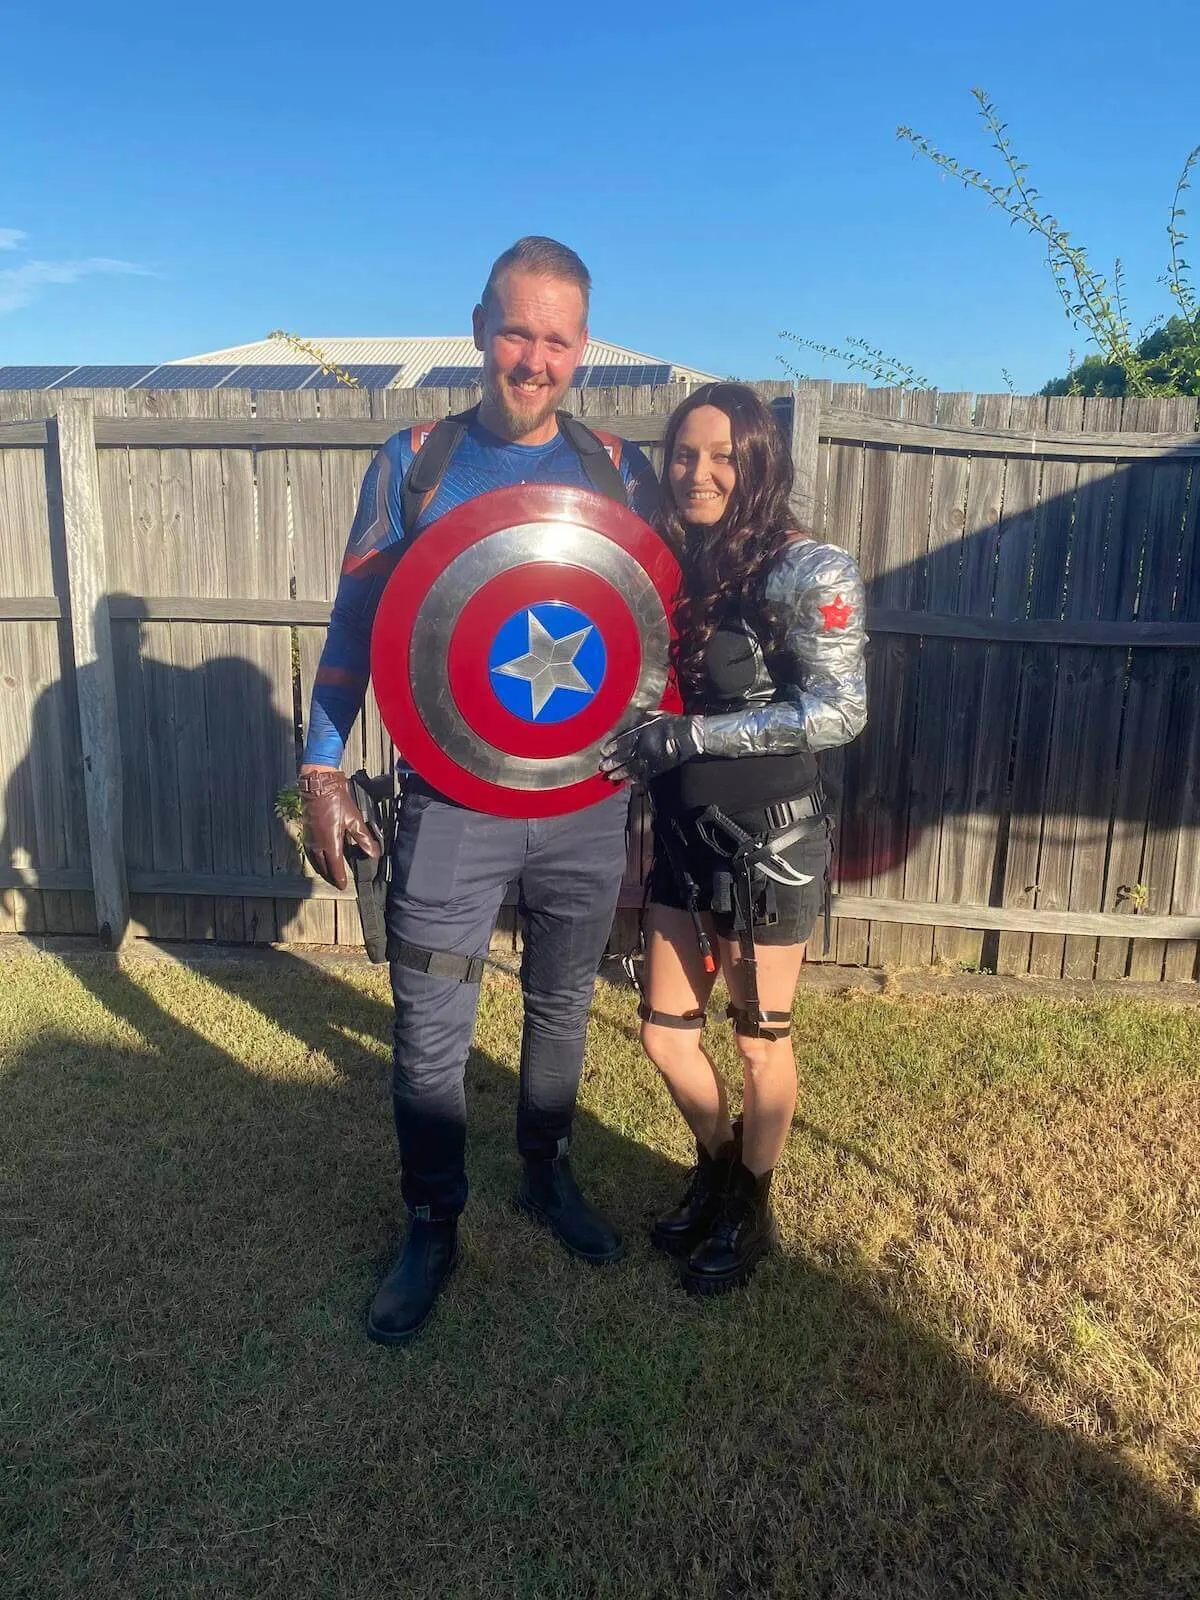 Holly and simon dressed up as captain america and the winter soldier in a backyard.